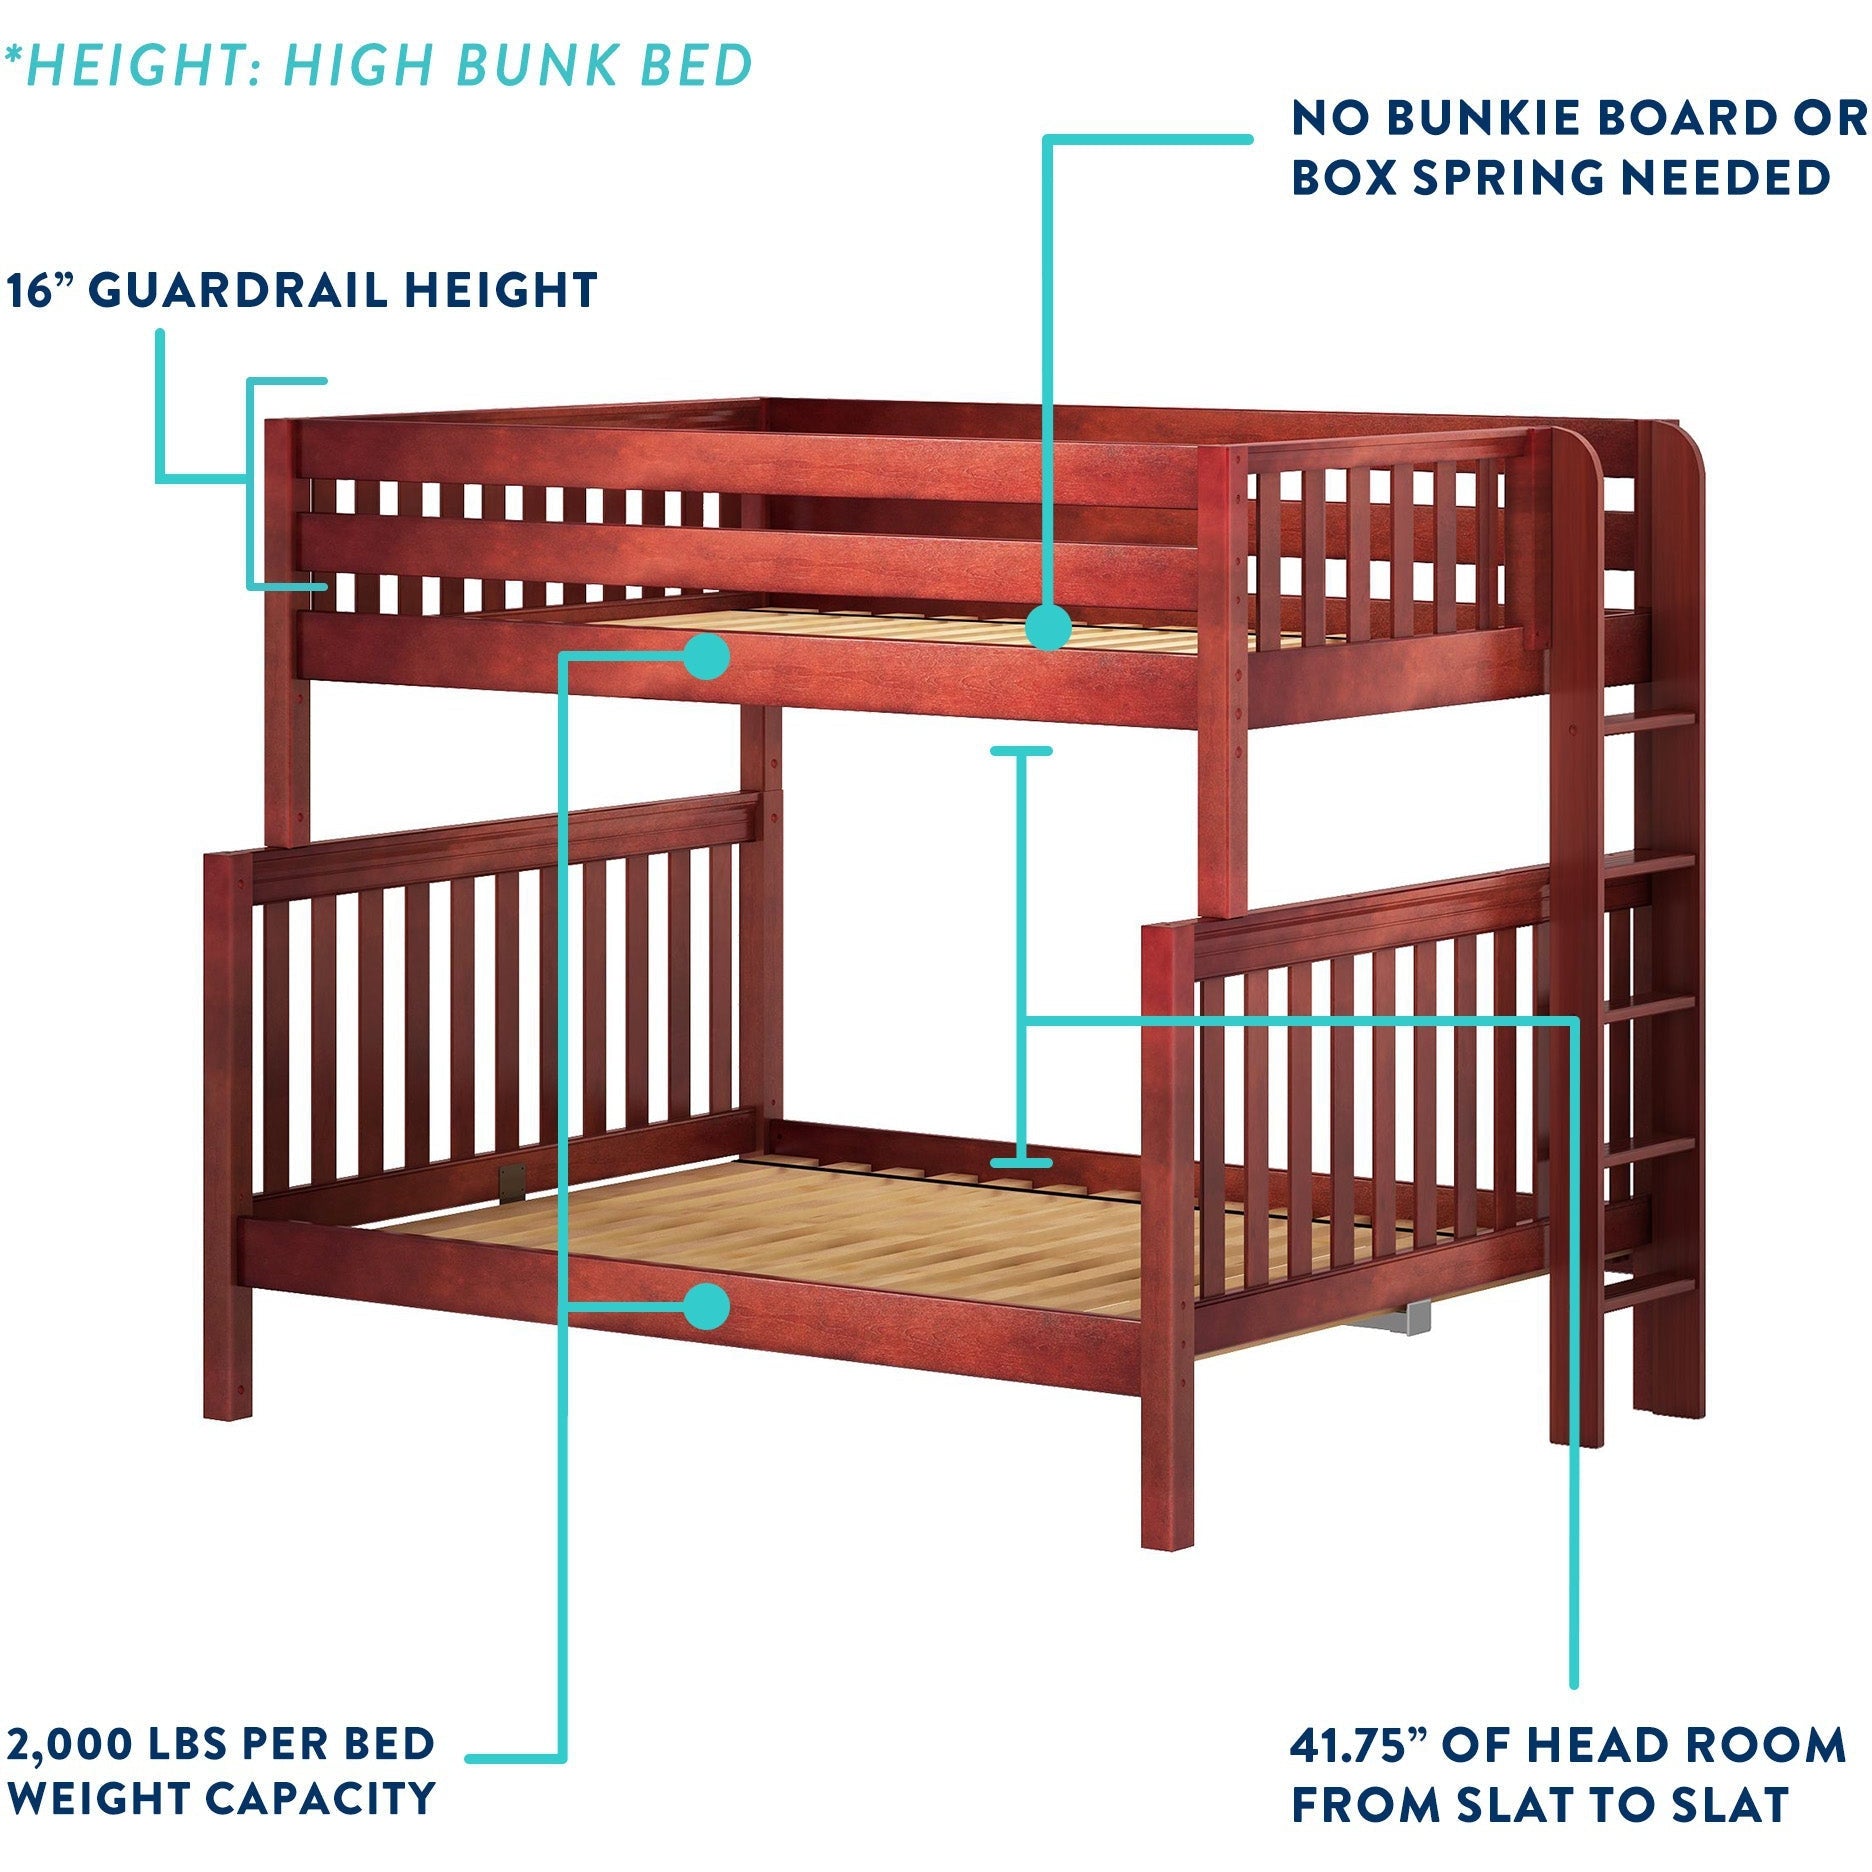 Maxtrix Twin XL High Bunk Bed with Stairs